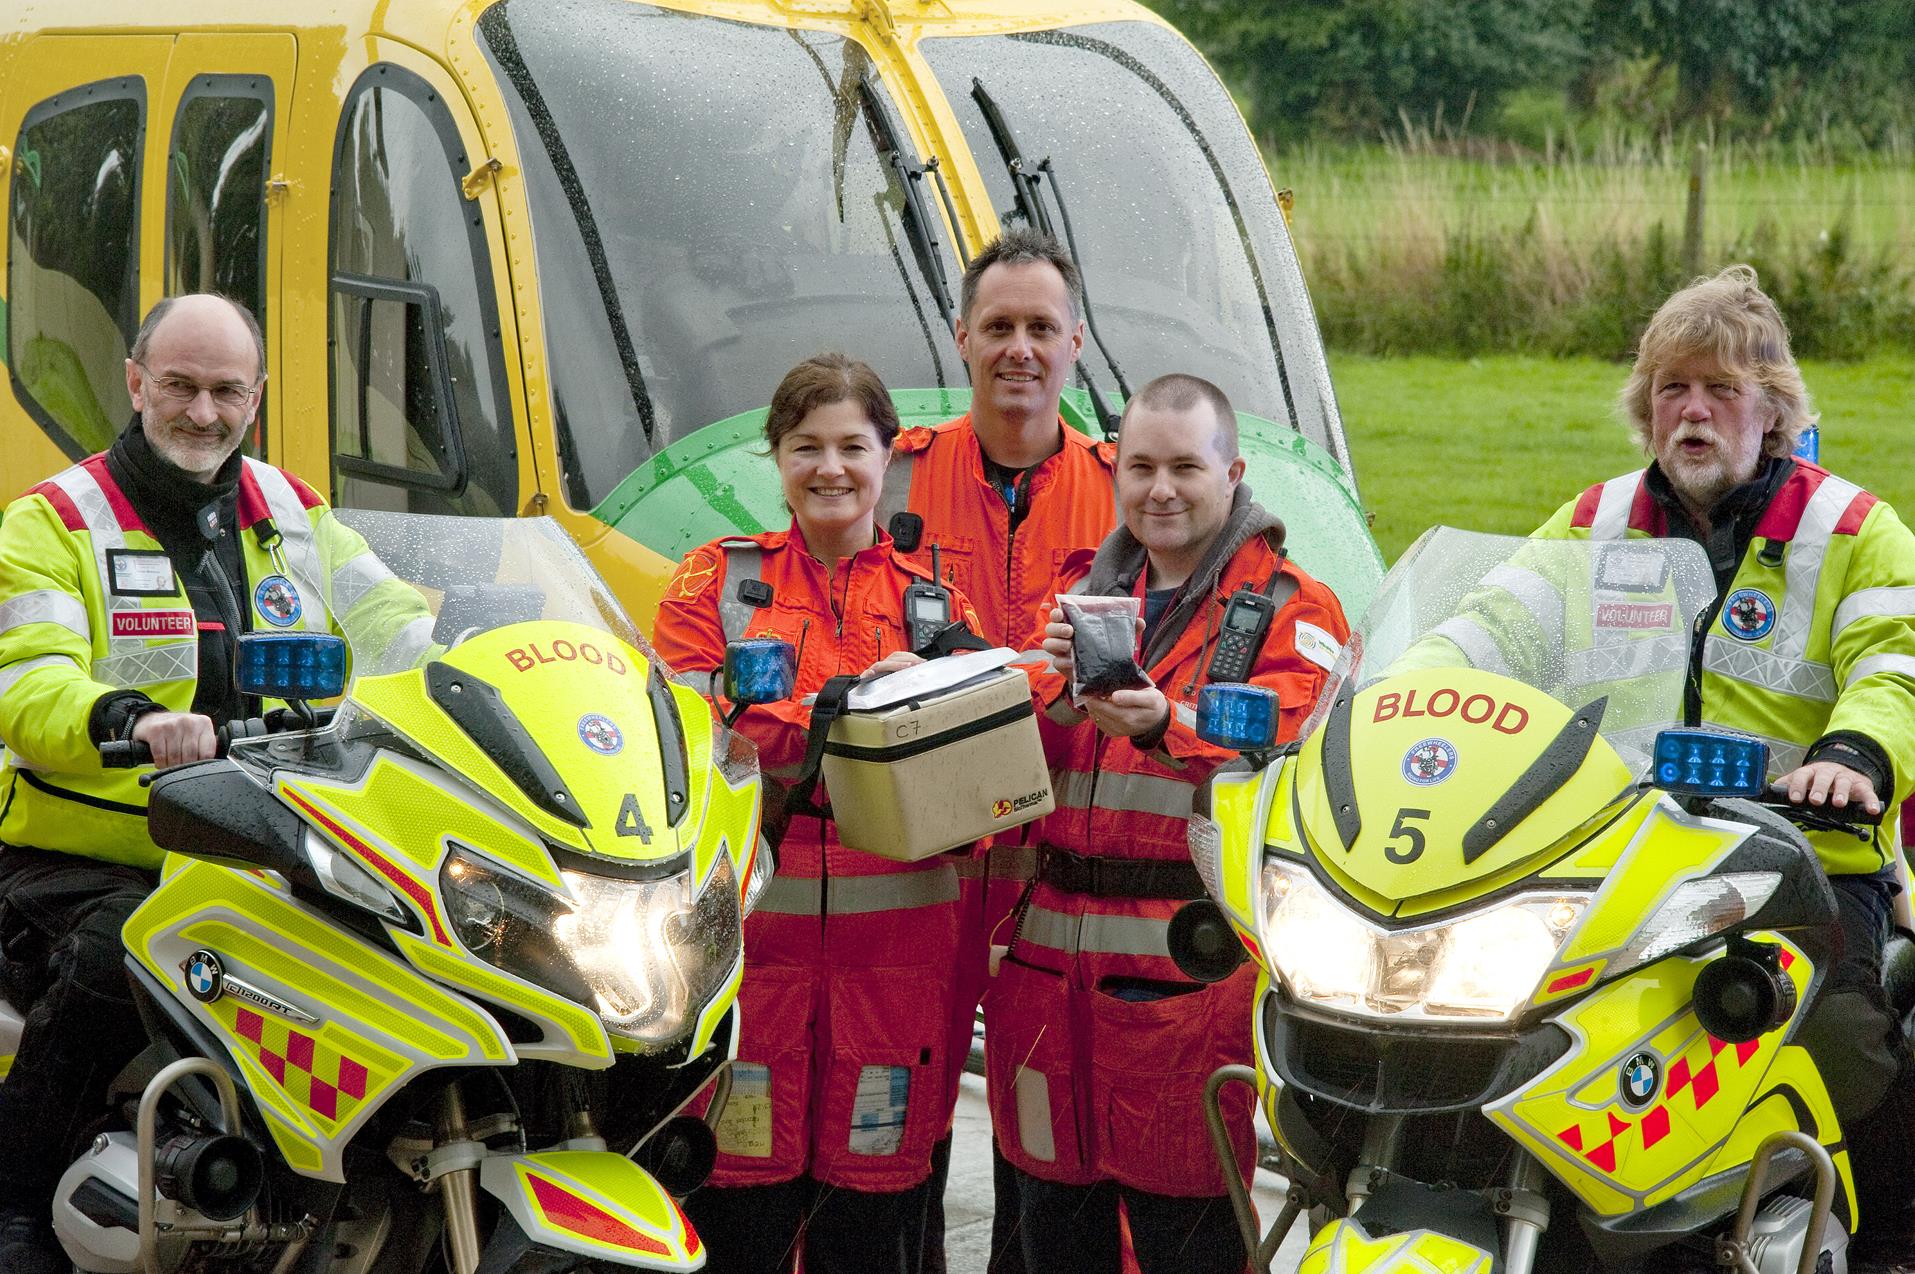 Snapped: Wiltshire and Great Western Air Ambulances Carry Blood